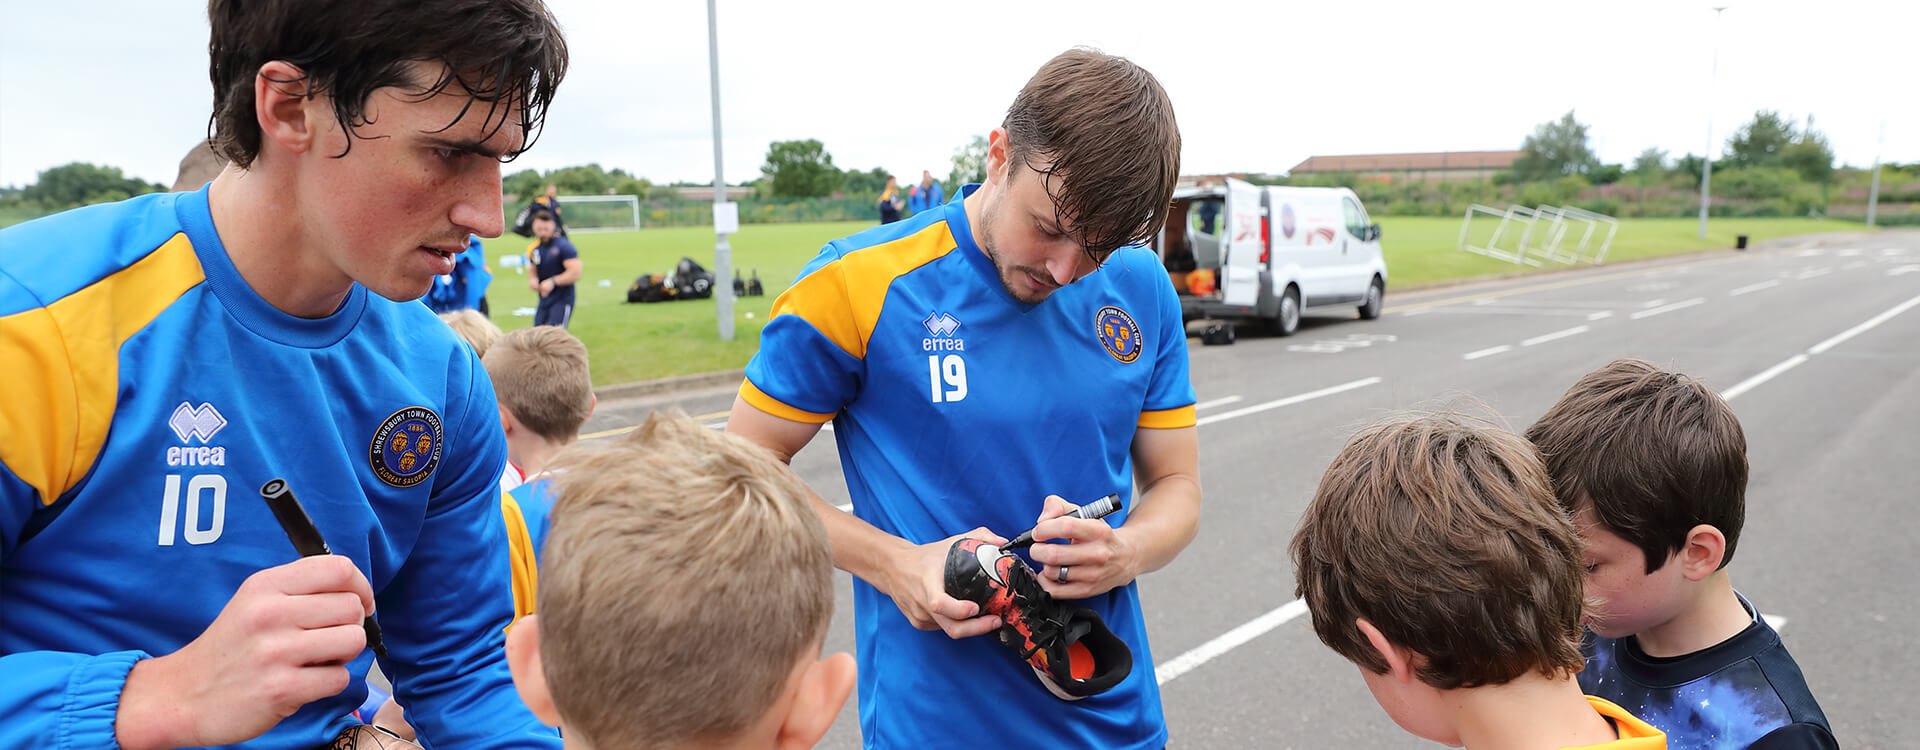 Shrewsbury Town FC players sign boots for fans